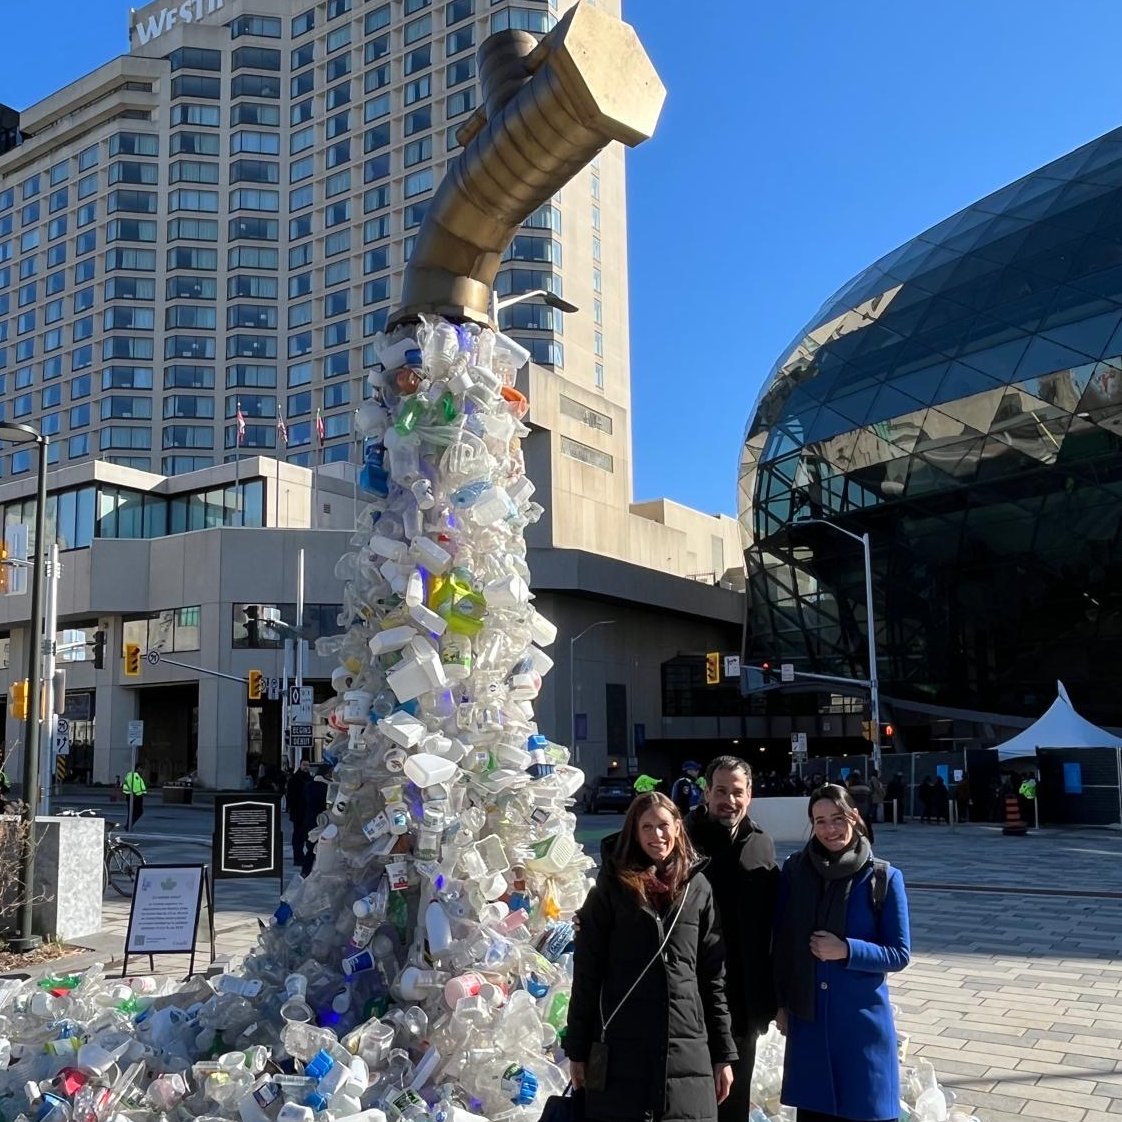 🌏Today on the #EarthDay, delegates from 174 countries gather in #Ottawa to negotiate a #GlobalPlasticsTreaty to #BeatPlasticPollution. Our GPAP team is on the ground, sharing our experience of mobilizing global and national plastic action partnerships @UNEP #INC4 #PlasticAction